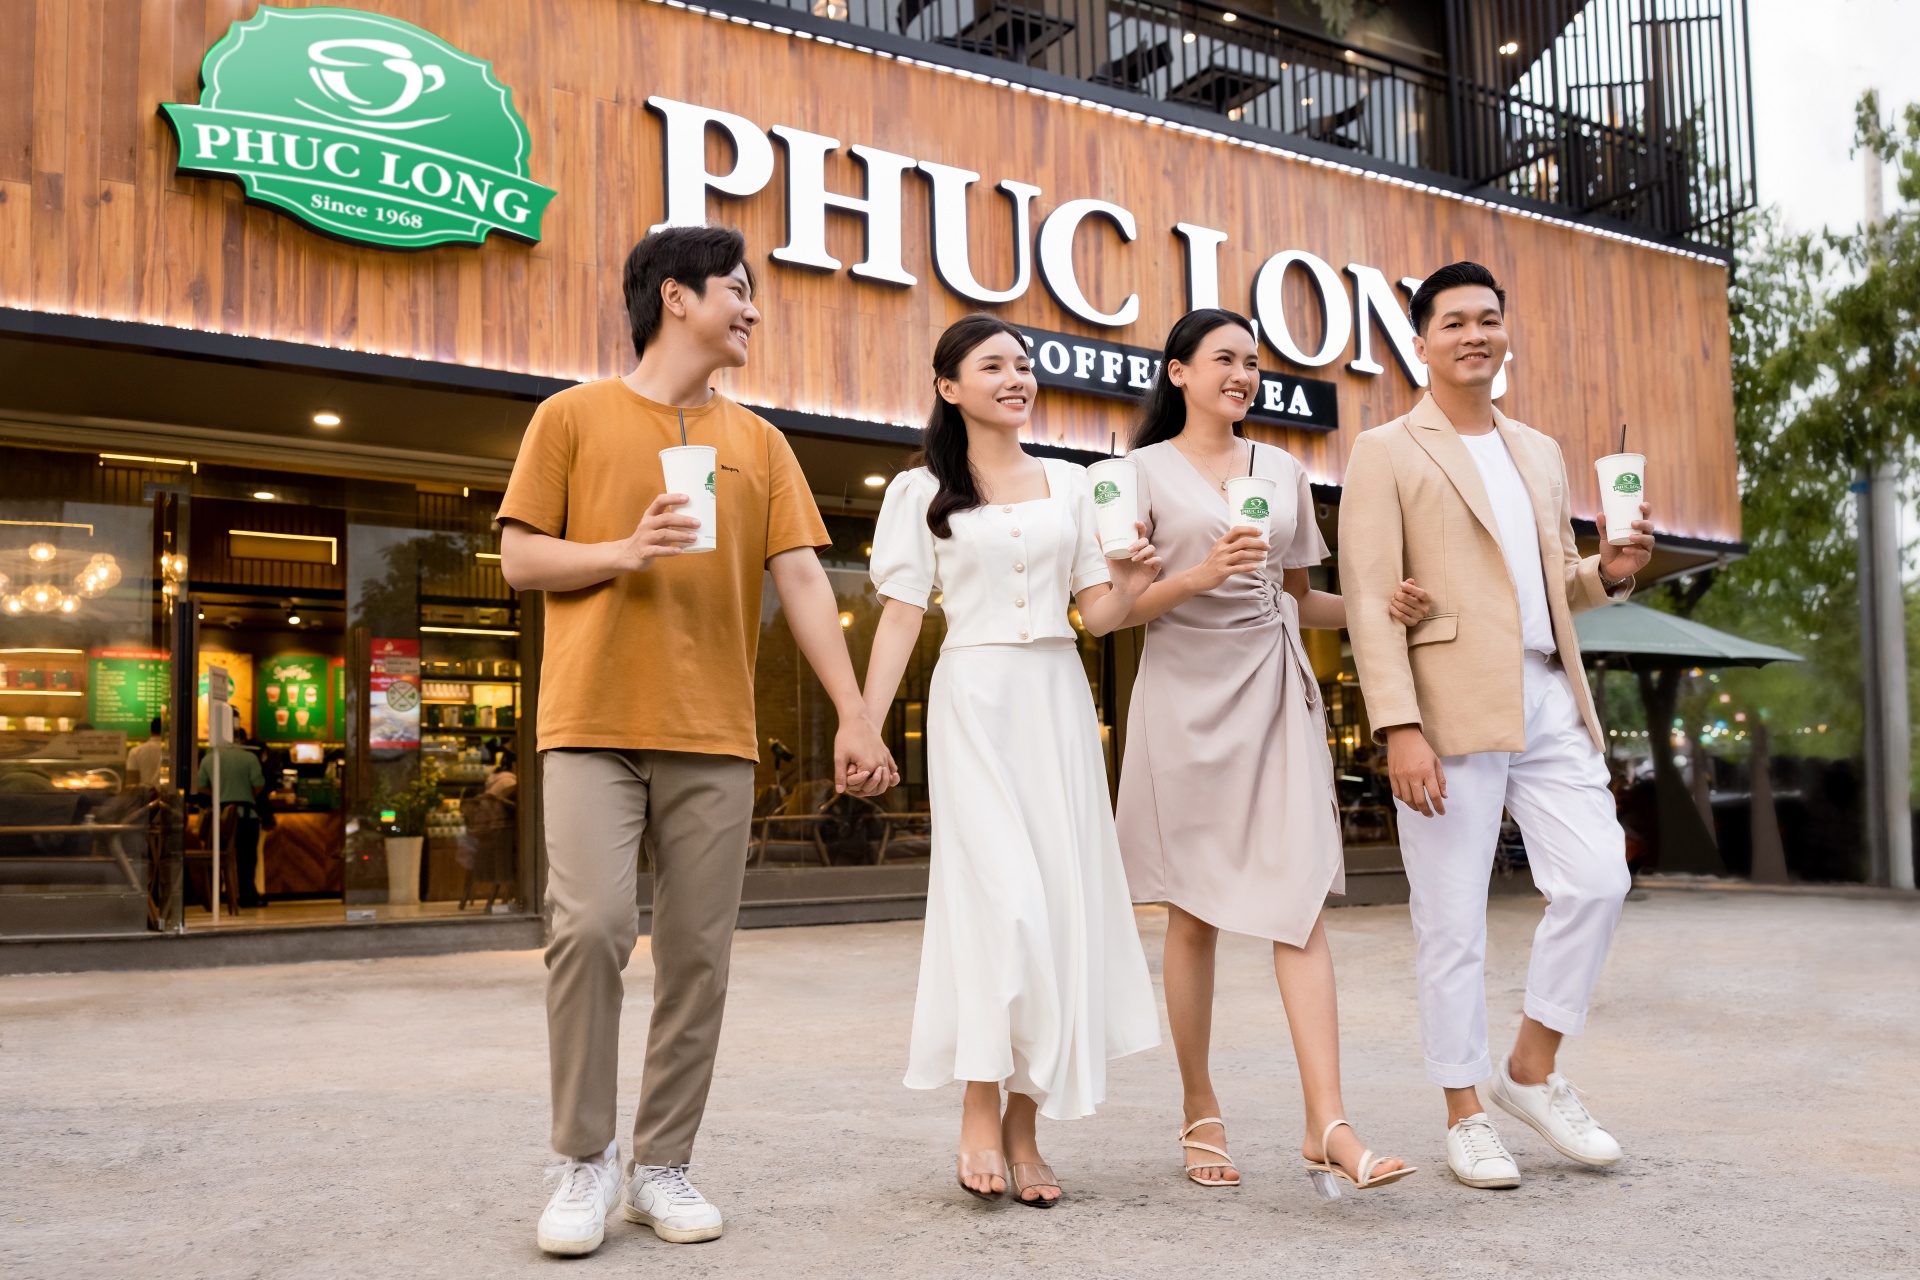 Behind the $455 million valuation of Phuc Long